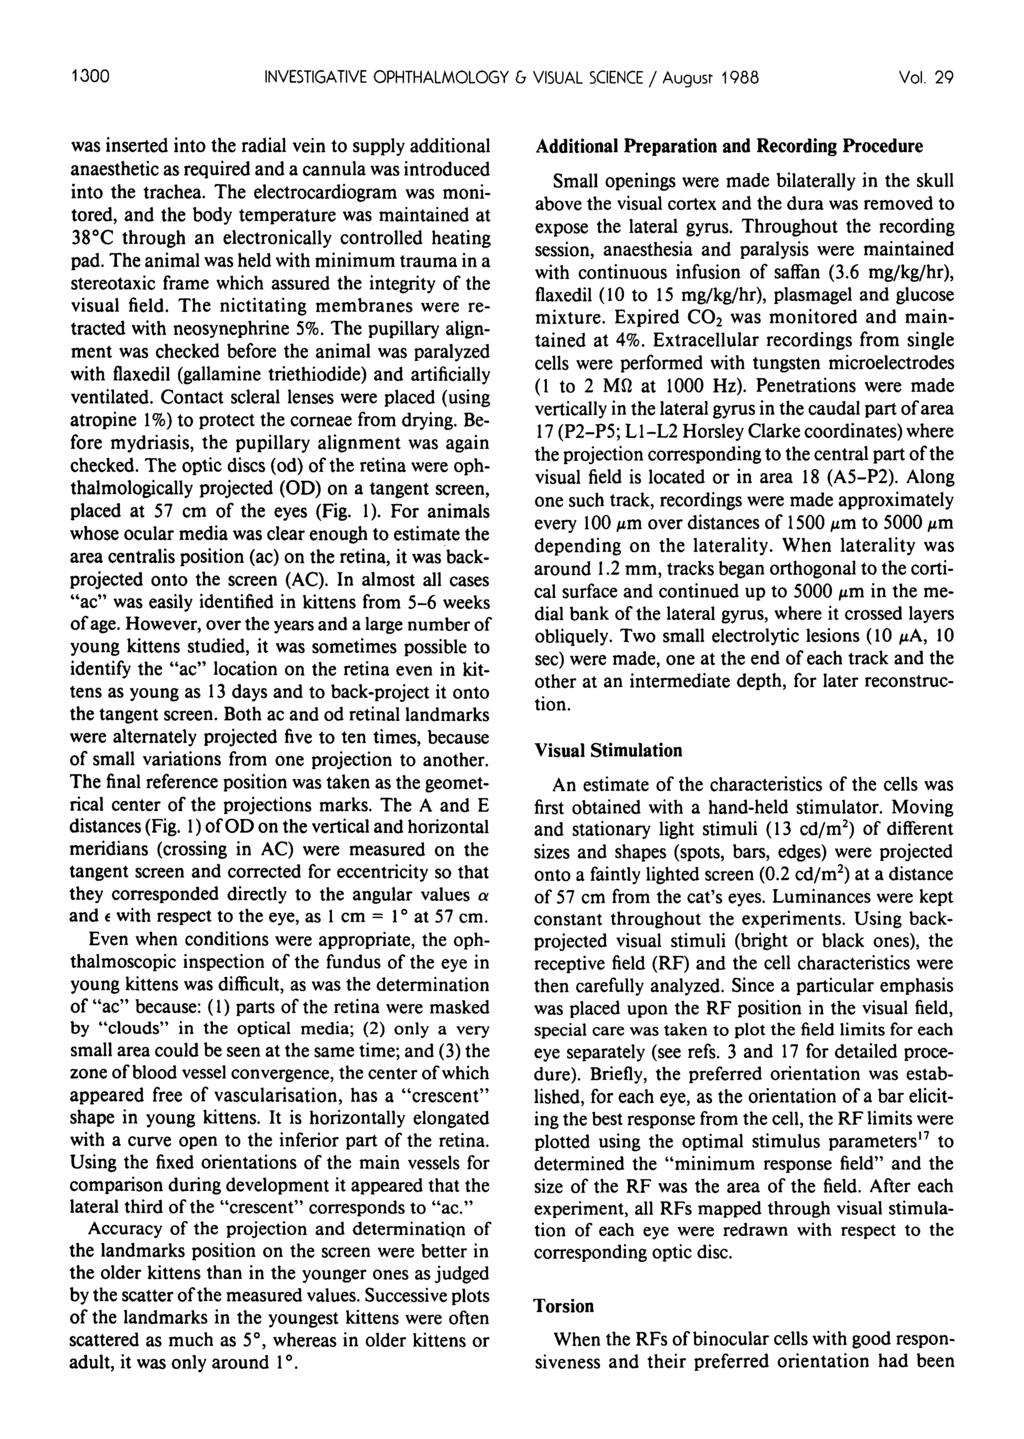 1300 INVESTIGATIVE OPHTHALMOLOGY 6 VISUAL SCIENCE / Augusr 1988 Vol. 29 was inserted into the radial vein to supply additional anaesthetic as required and a cannula was introduced into the trachea.